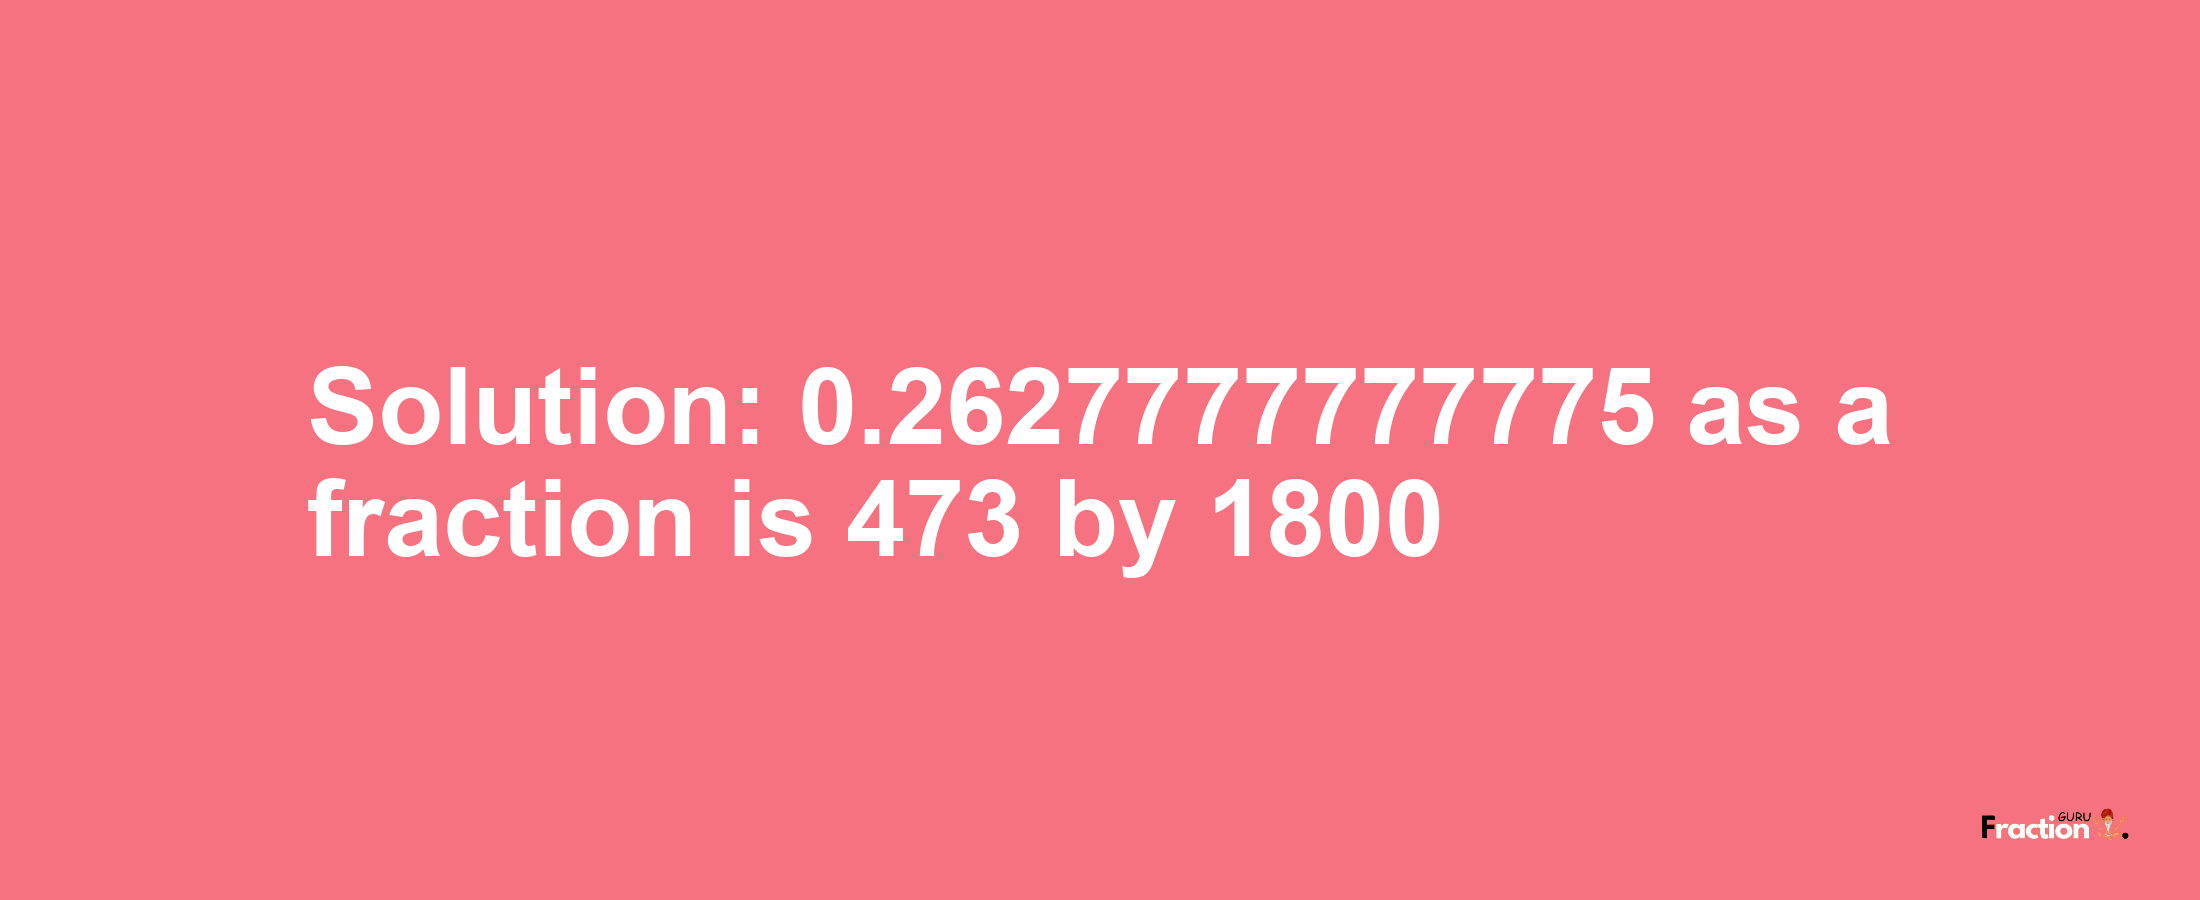 Solution:0.2627777777775 as a fraction is 473/1800